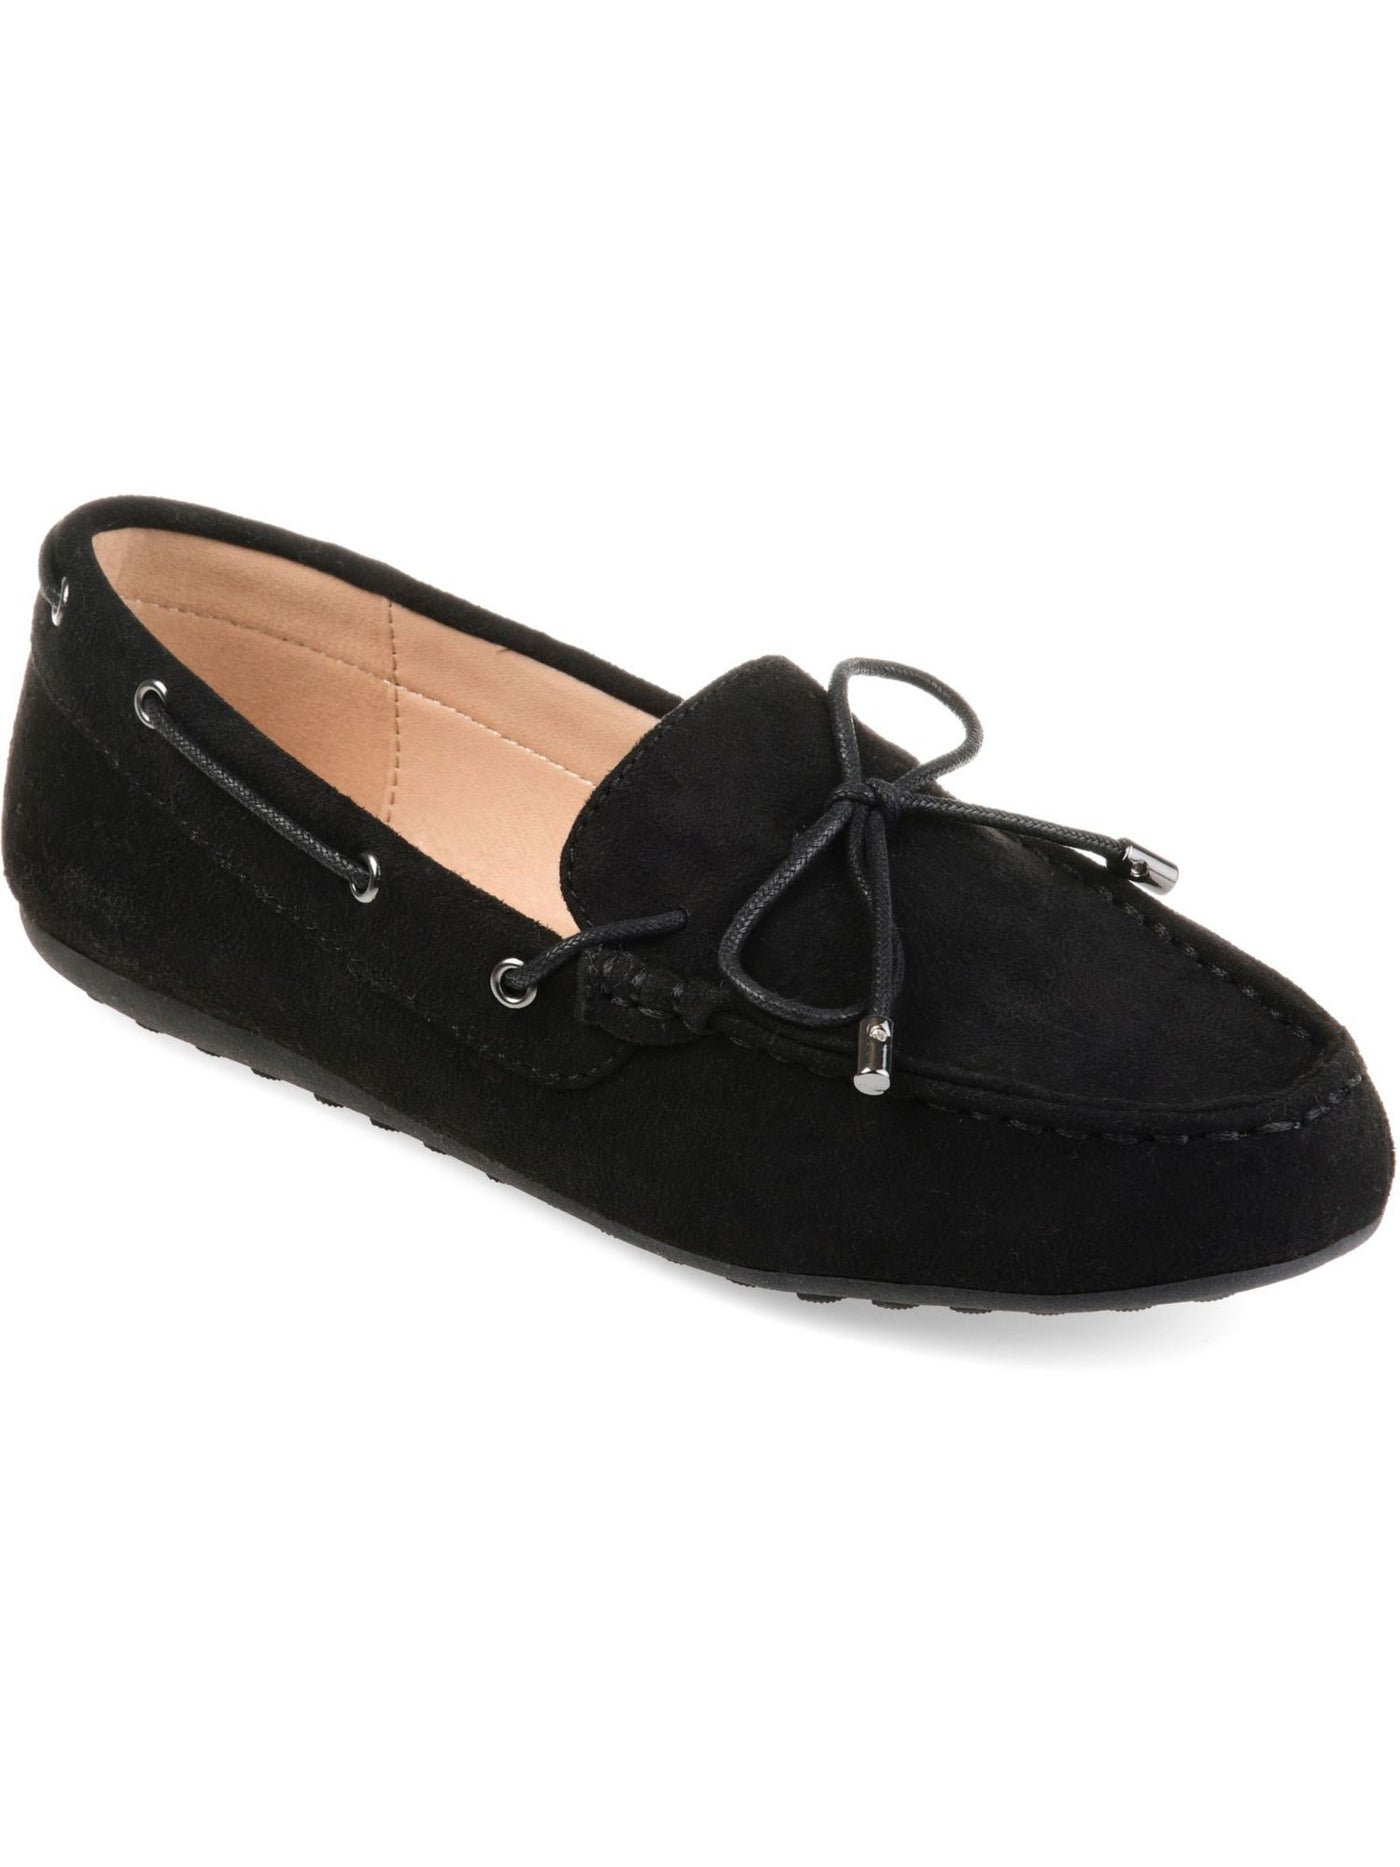 JOURNEE COLLECTION Womens Black Moccasin Style Padded Bow Accent Thatch Round Toe Slip On Loafers Shoes 12